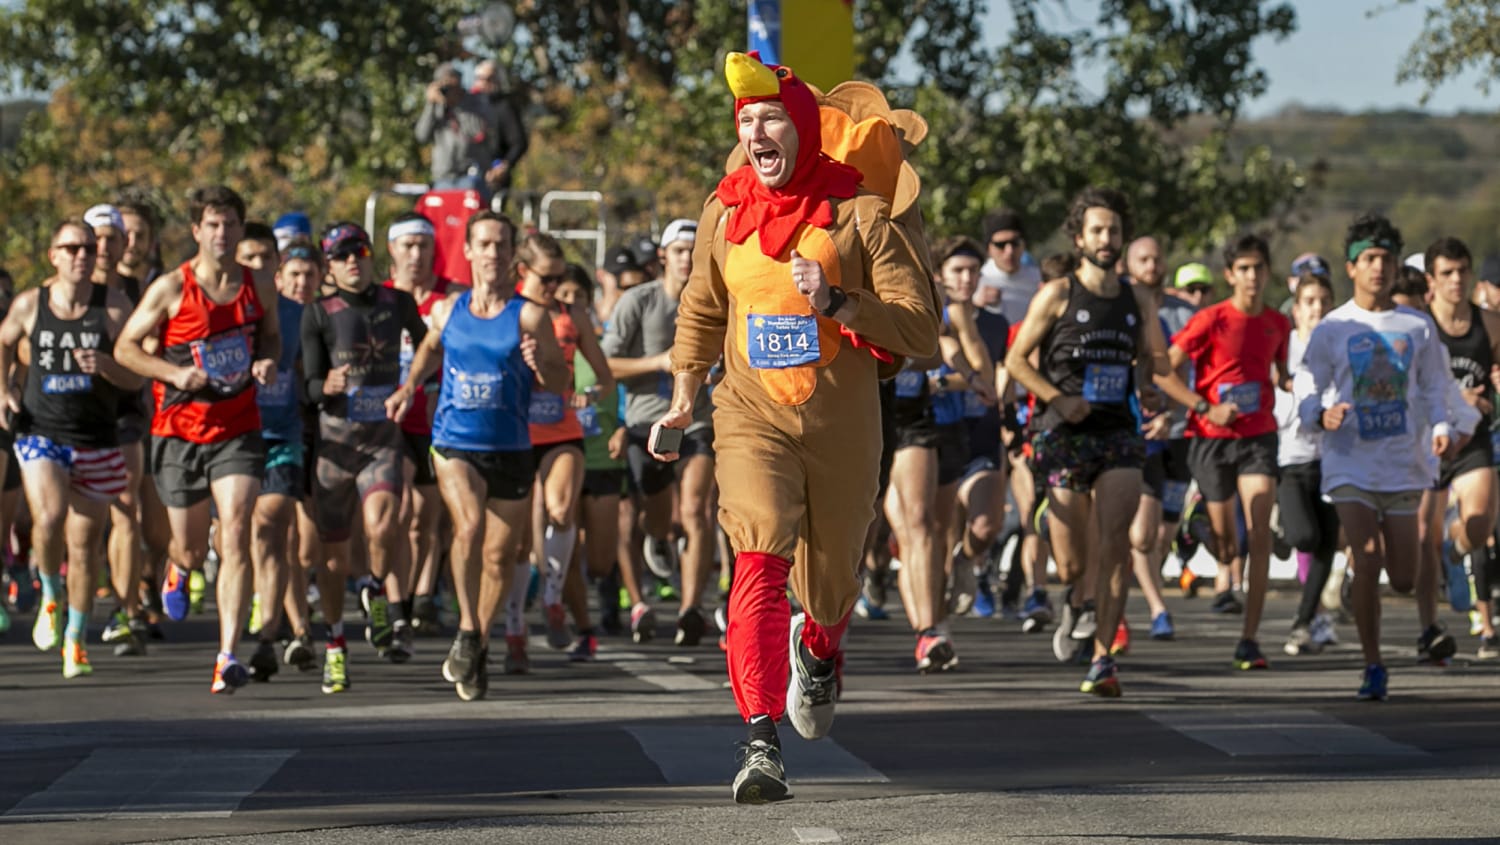 Turkey trot: A one-month 5K training plan for beginners